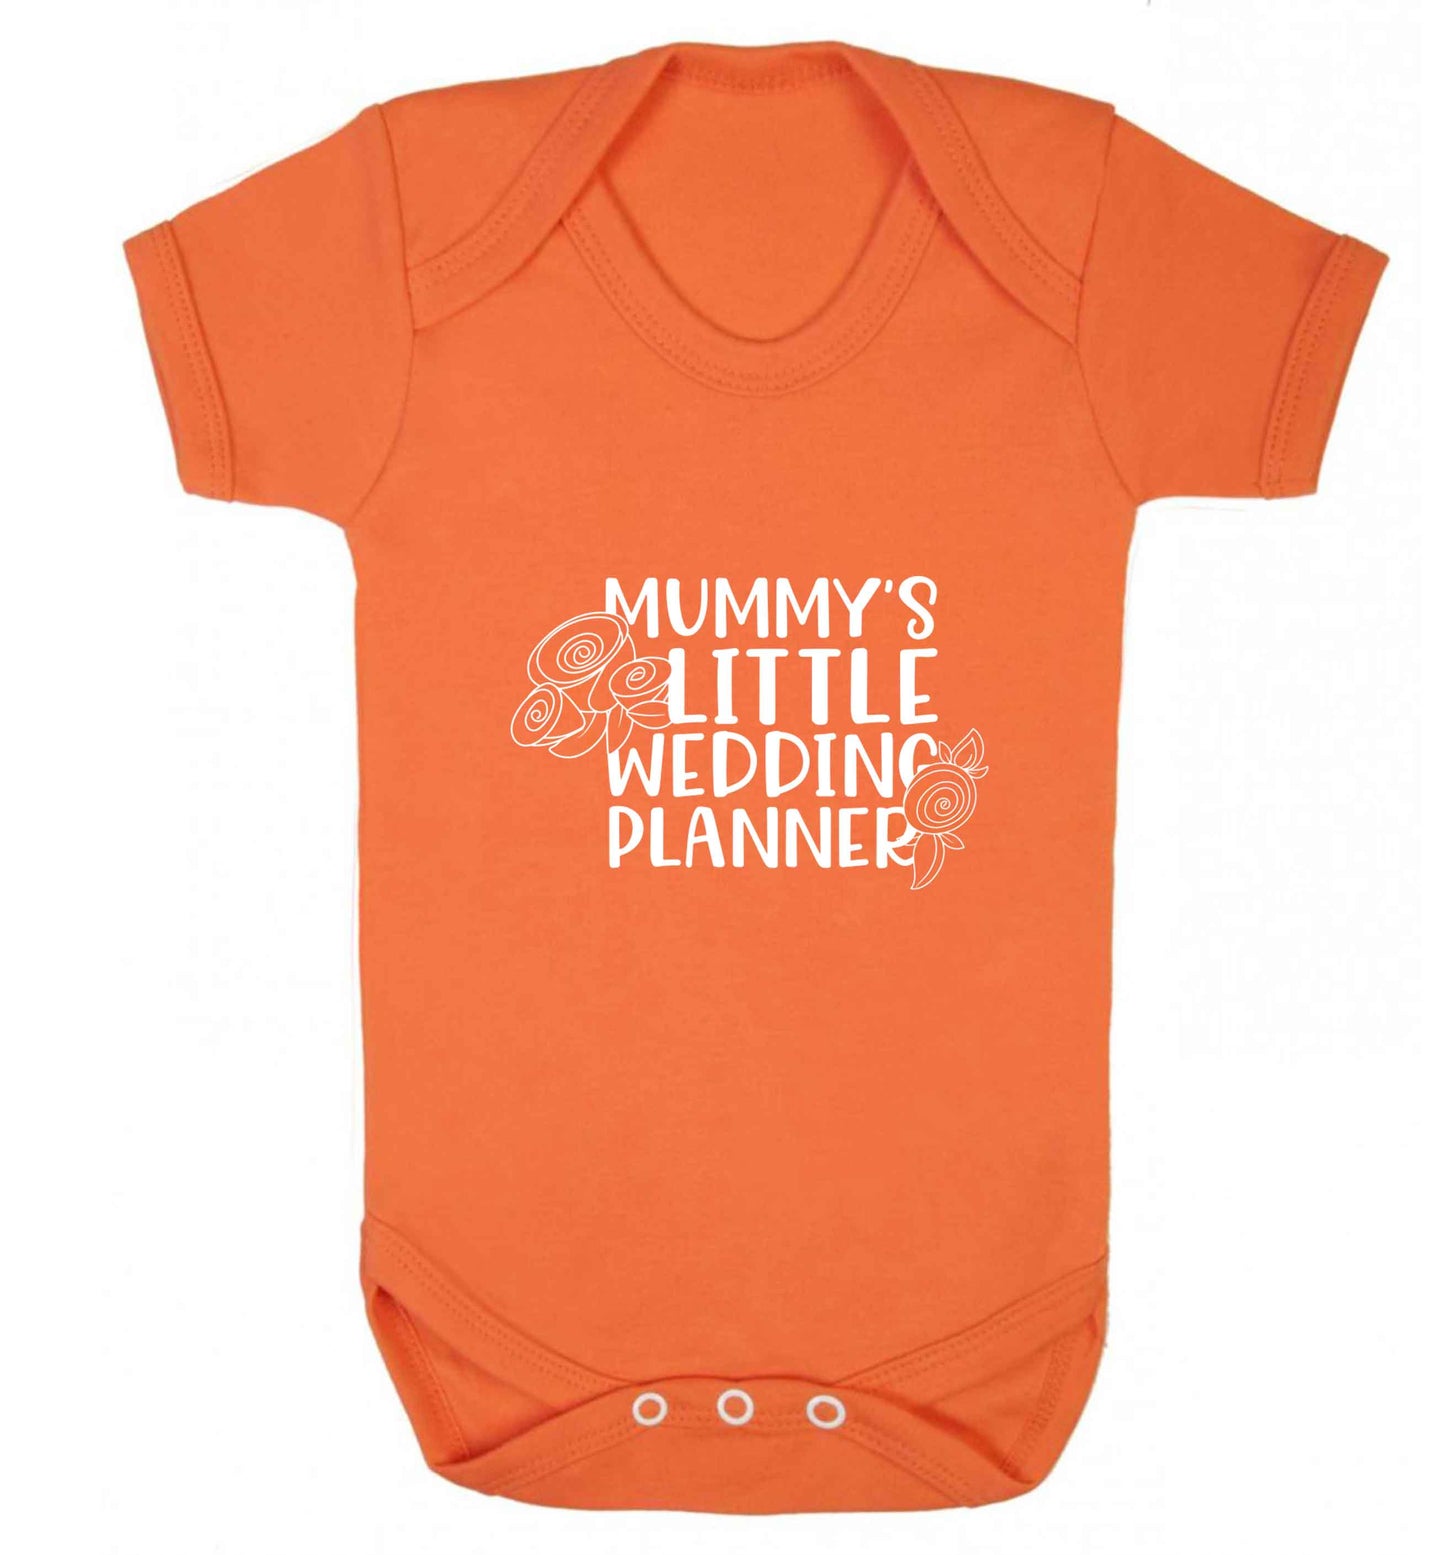 adorable wedding themed gifts for your mini wedding planner! baby vest orange 18-24 months